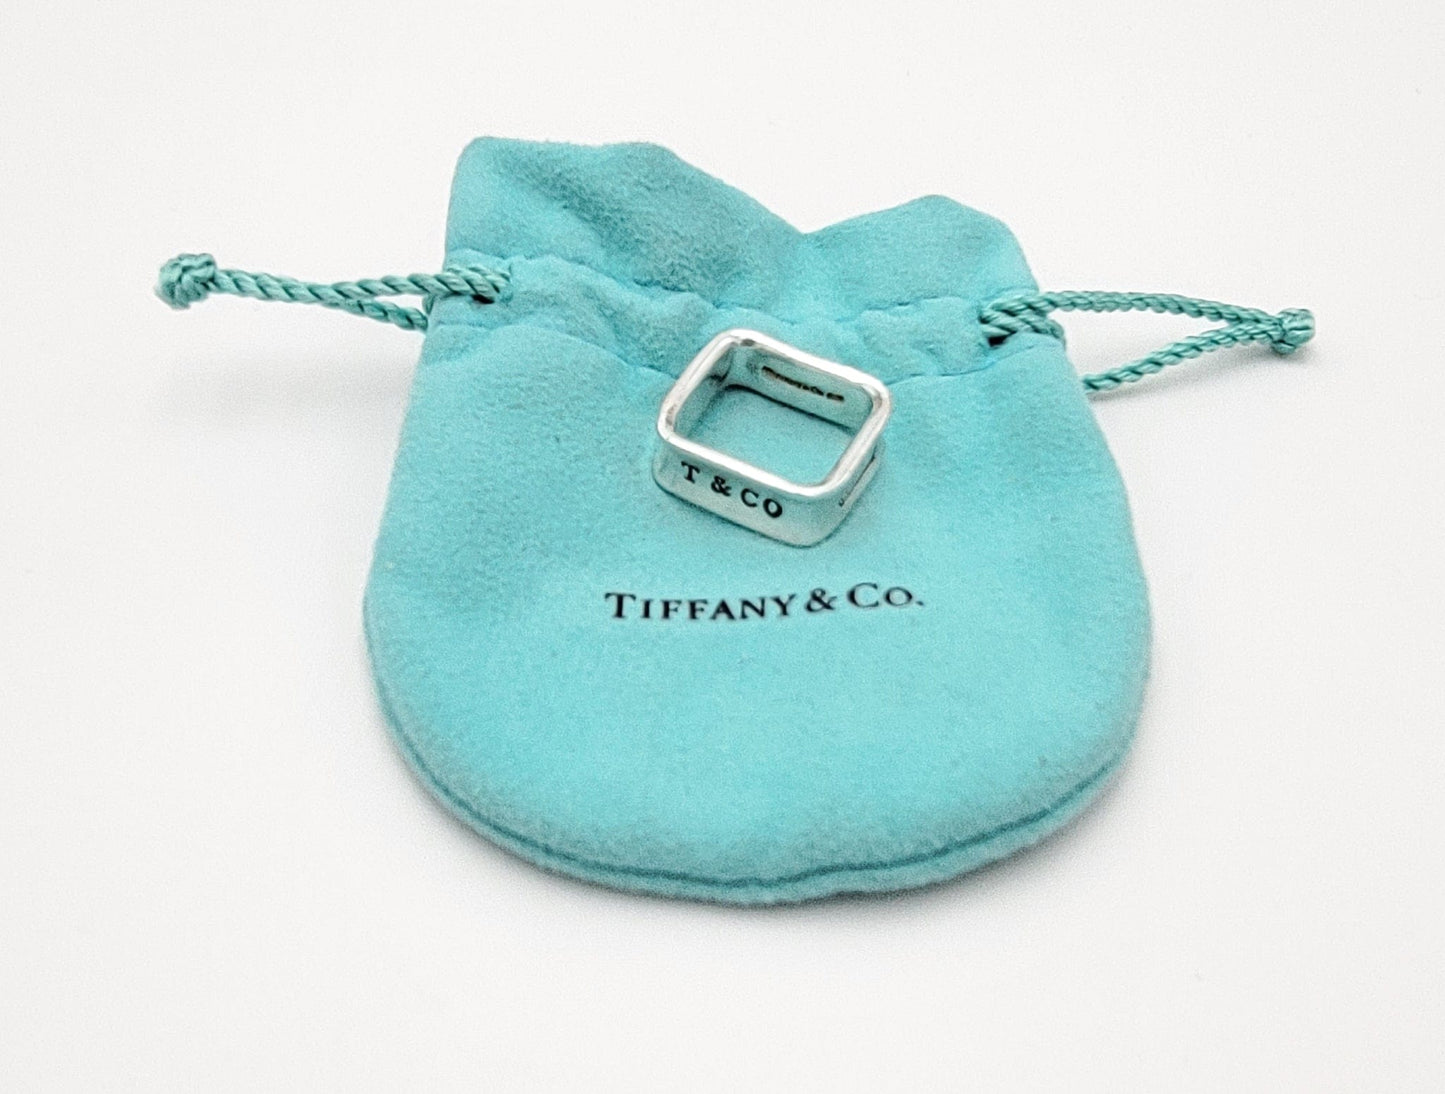 Tiffany & Co. Jewelry Authentic Sterling Silver Tiffany & Co Rare 1837 Square Shaped Ring & Bag 1980s